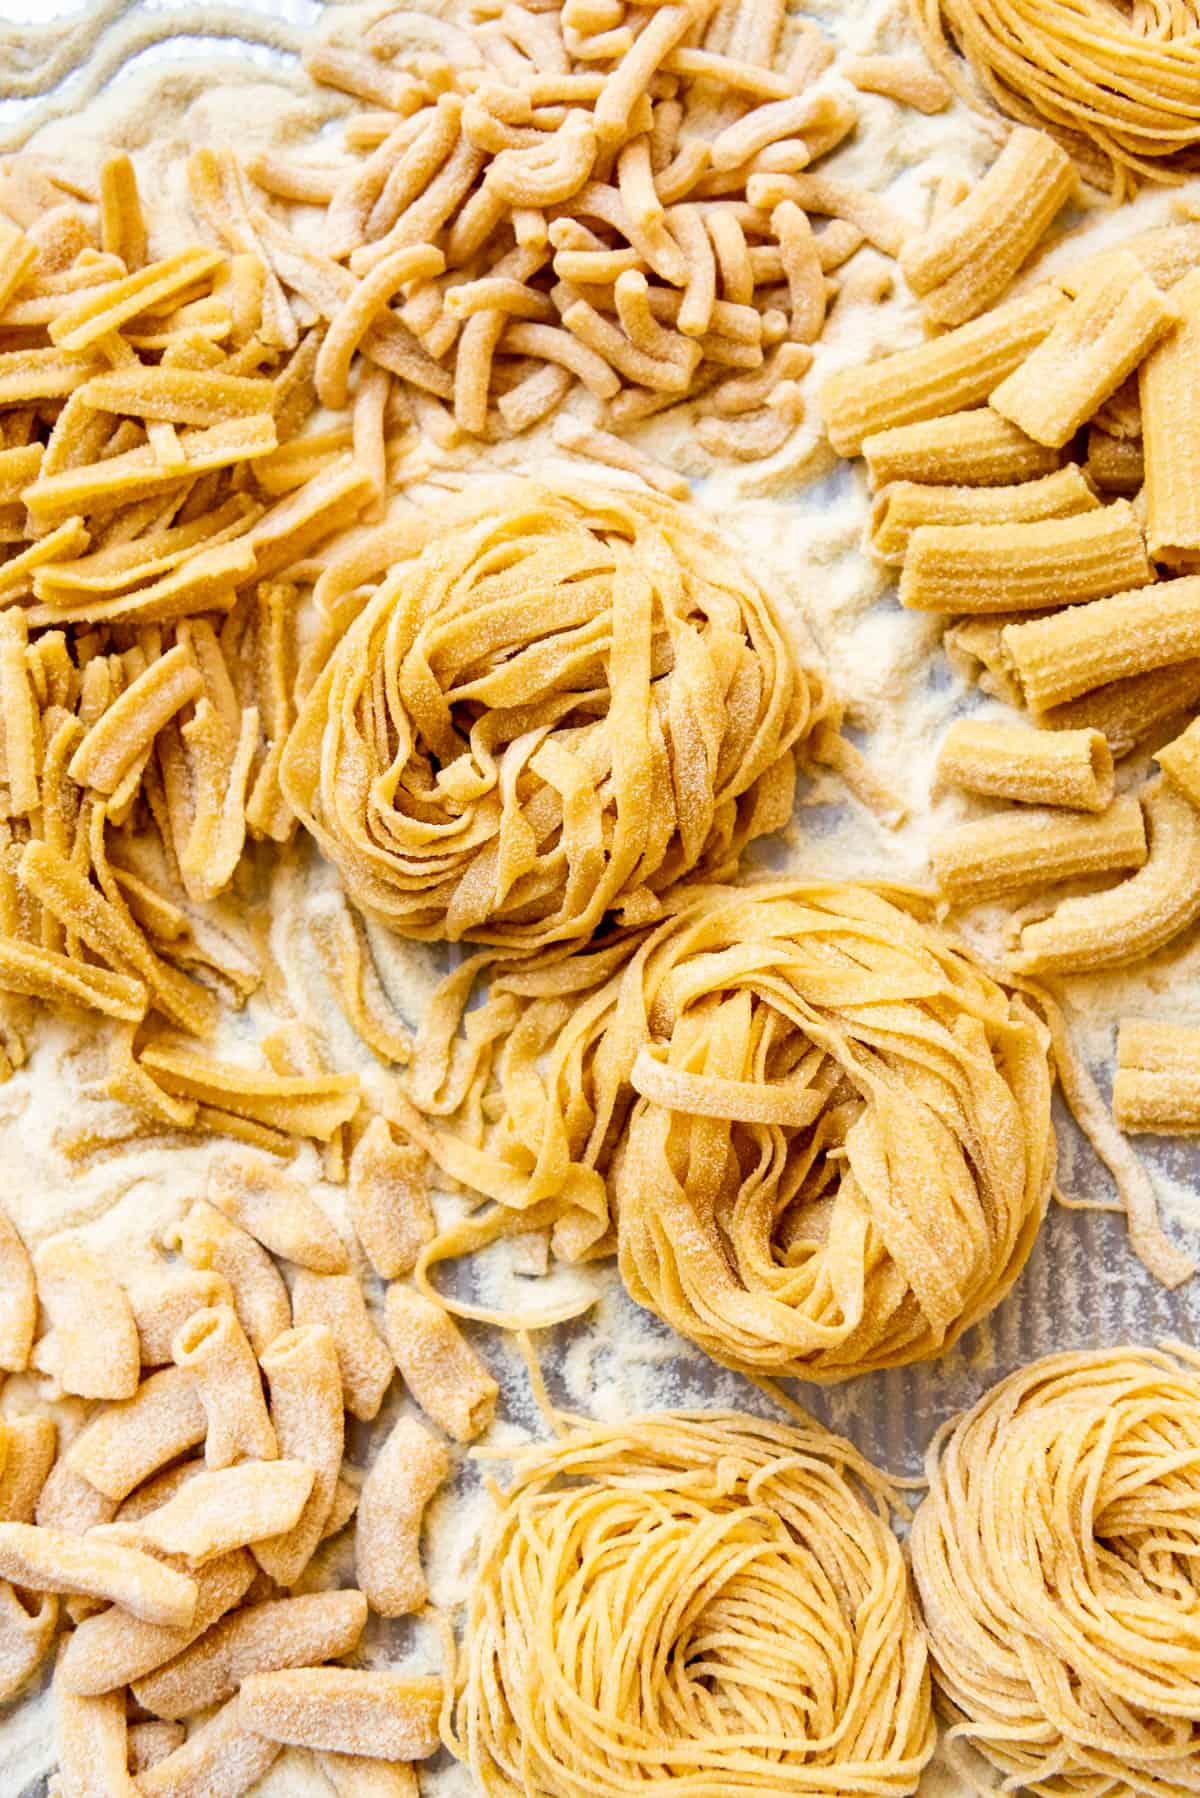 Different types of fresh homemade pasta around nests of fresh fettuccine pasta noodles.